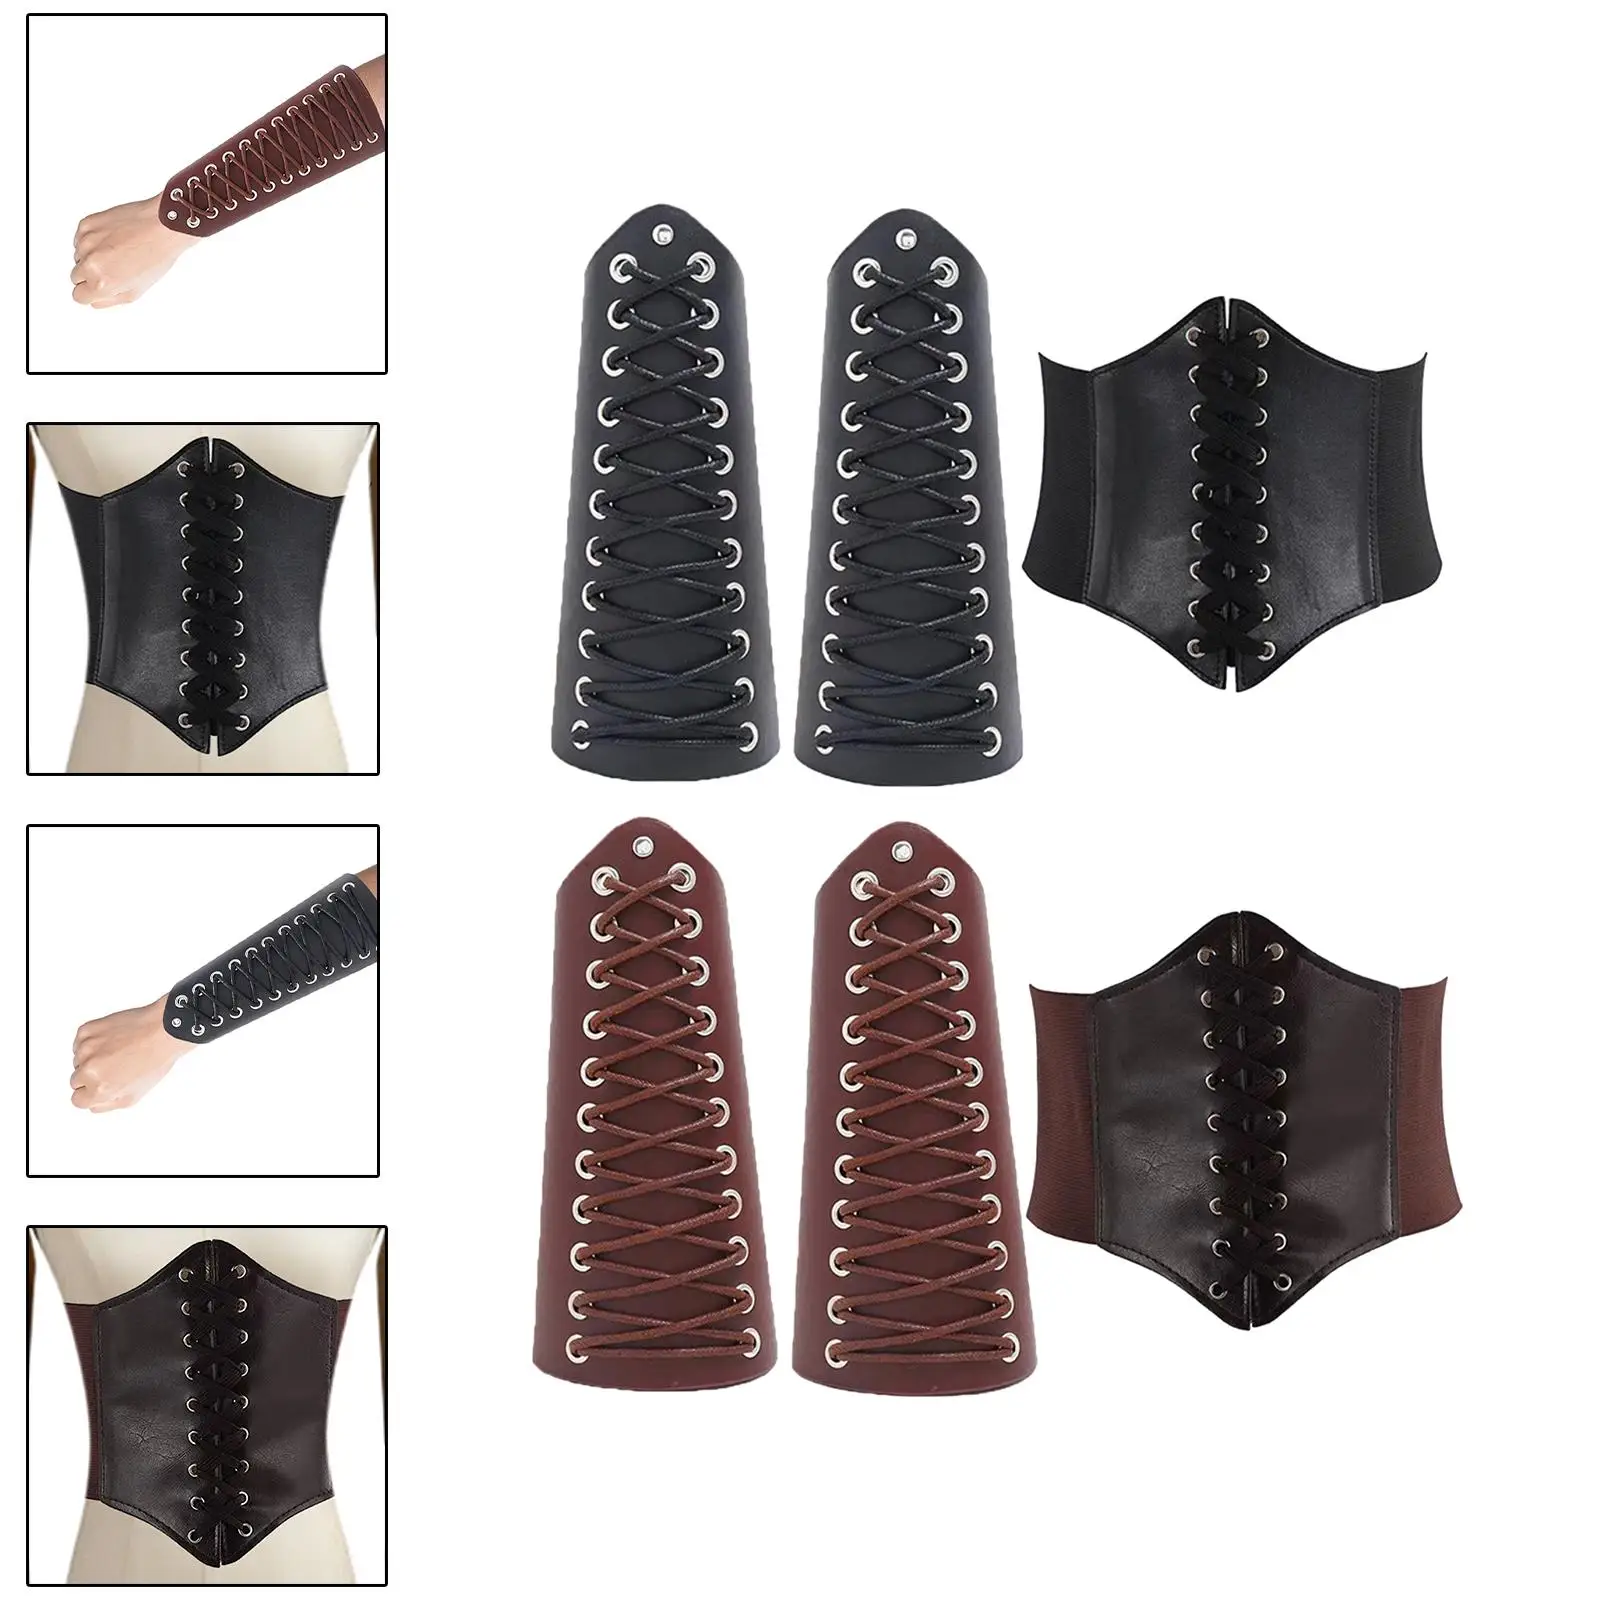 Waist Belt Costume Cinch Belt Arm Gauntlets Wristband for Parties Stage Performance Masquerade Dressing up Clothing Accessories